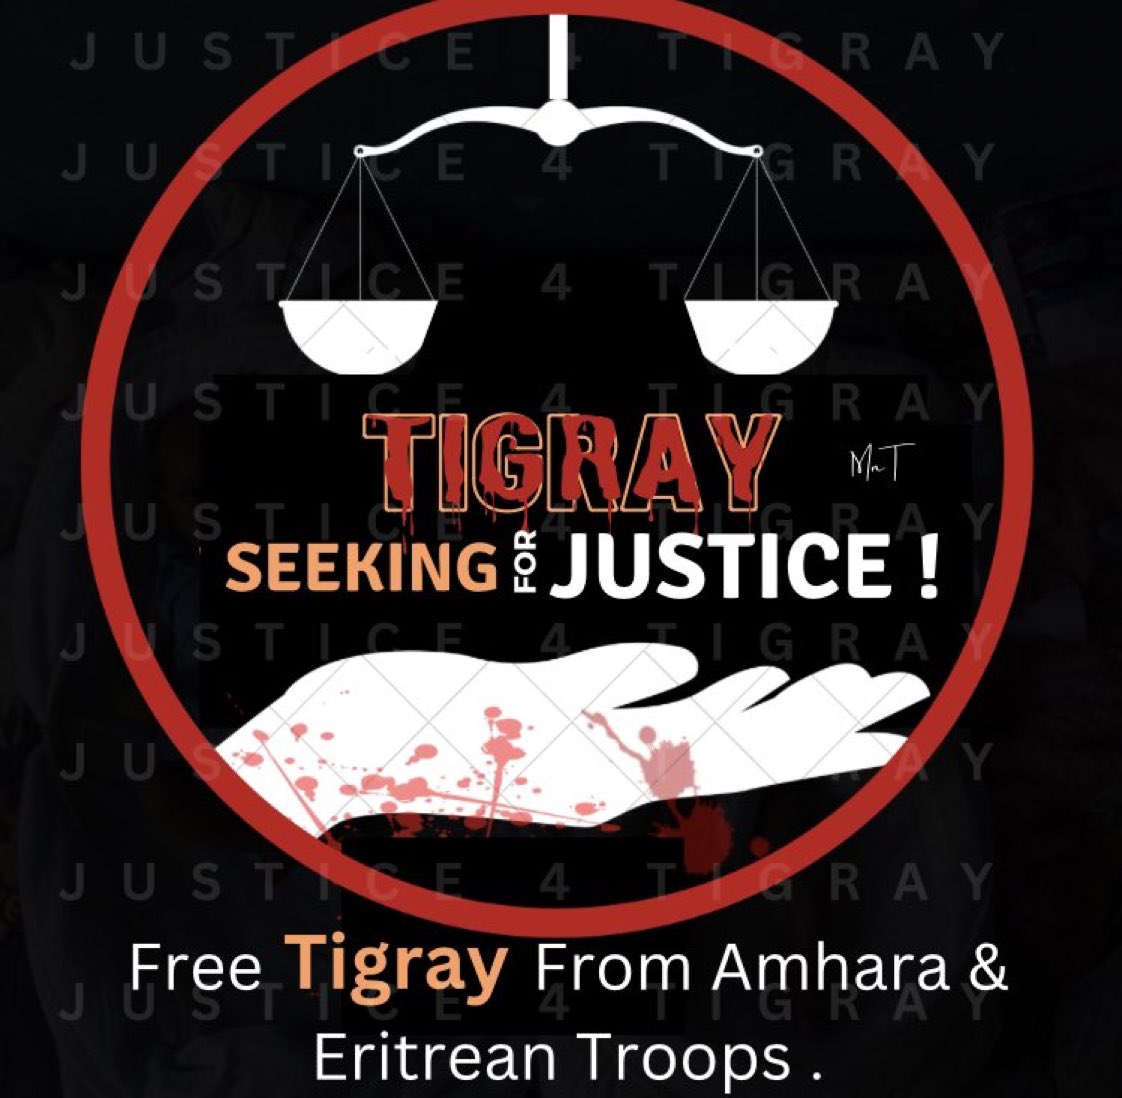 ⚠️Today marks #872days since #TigrayGenocide committed by 🇪🇹 & 🇪🇷 regime.+126K Tigrayan mothers & girls gang-raped.+800K Tigrayan civilians dead.But,This horrofic genocide still continuing. The @IntlCrimCourt @amnesty @POTUS #UNSC must take meangful action to #StopTigrayGenocide.